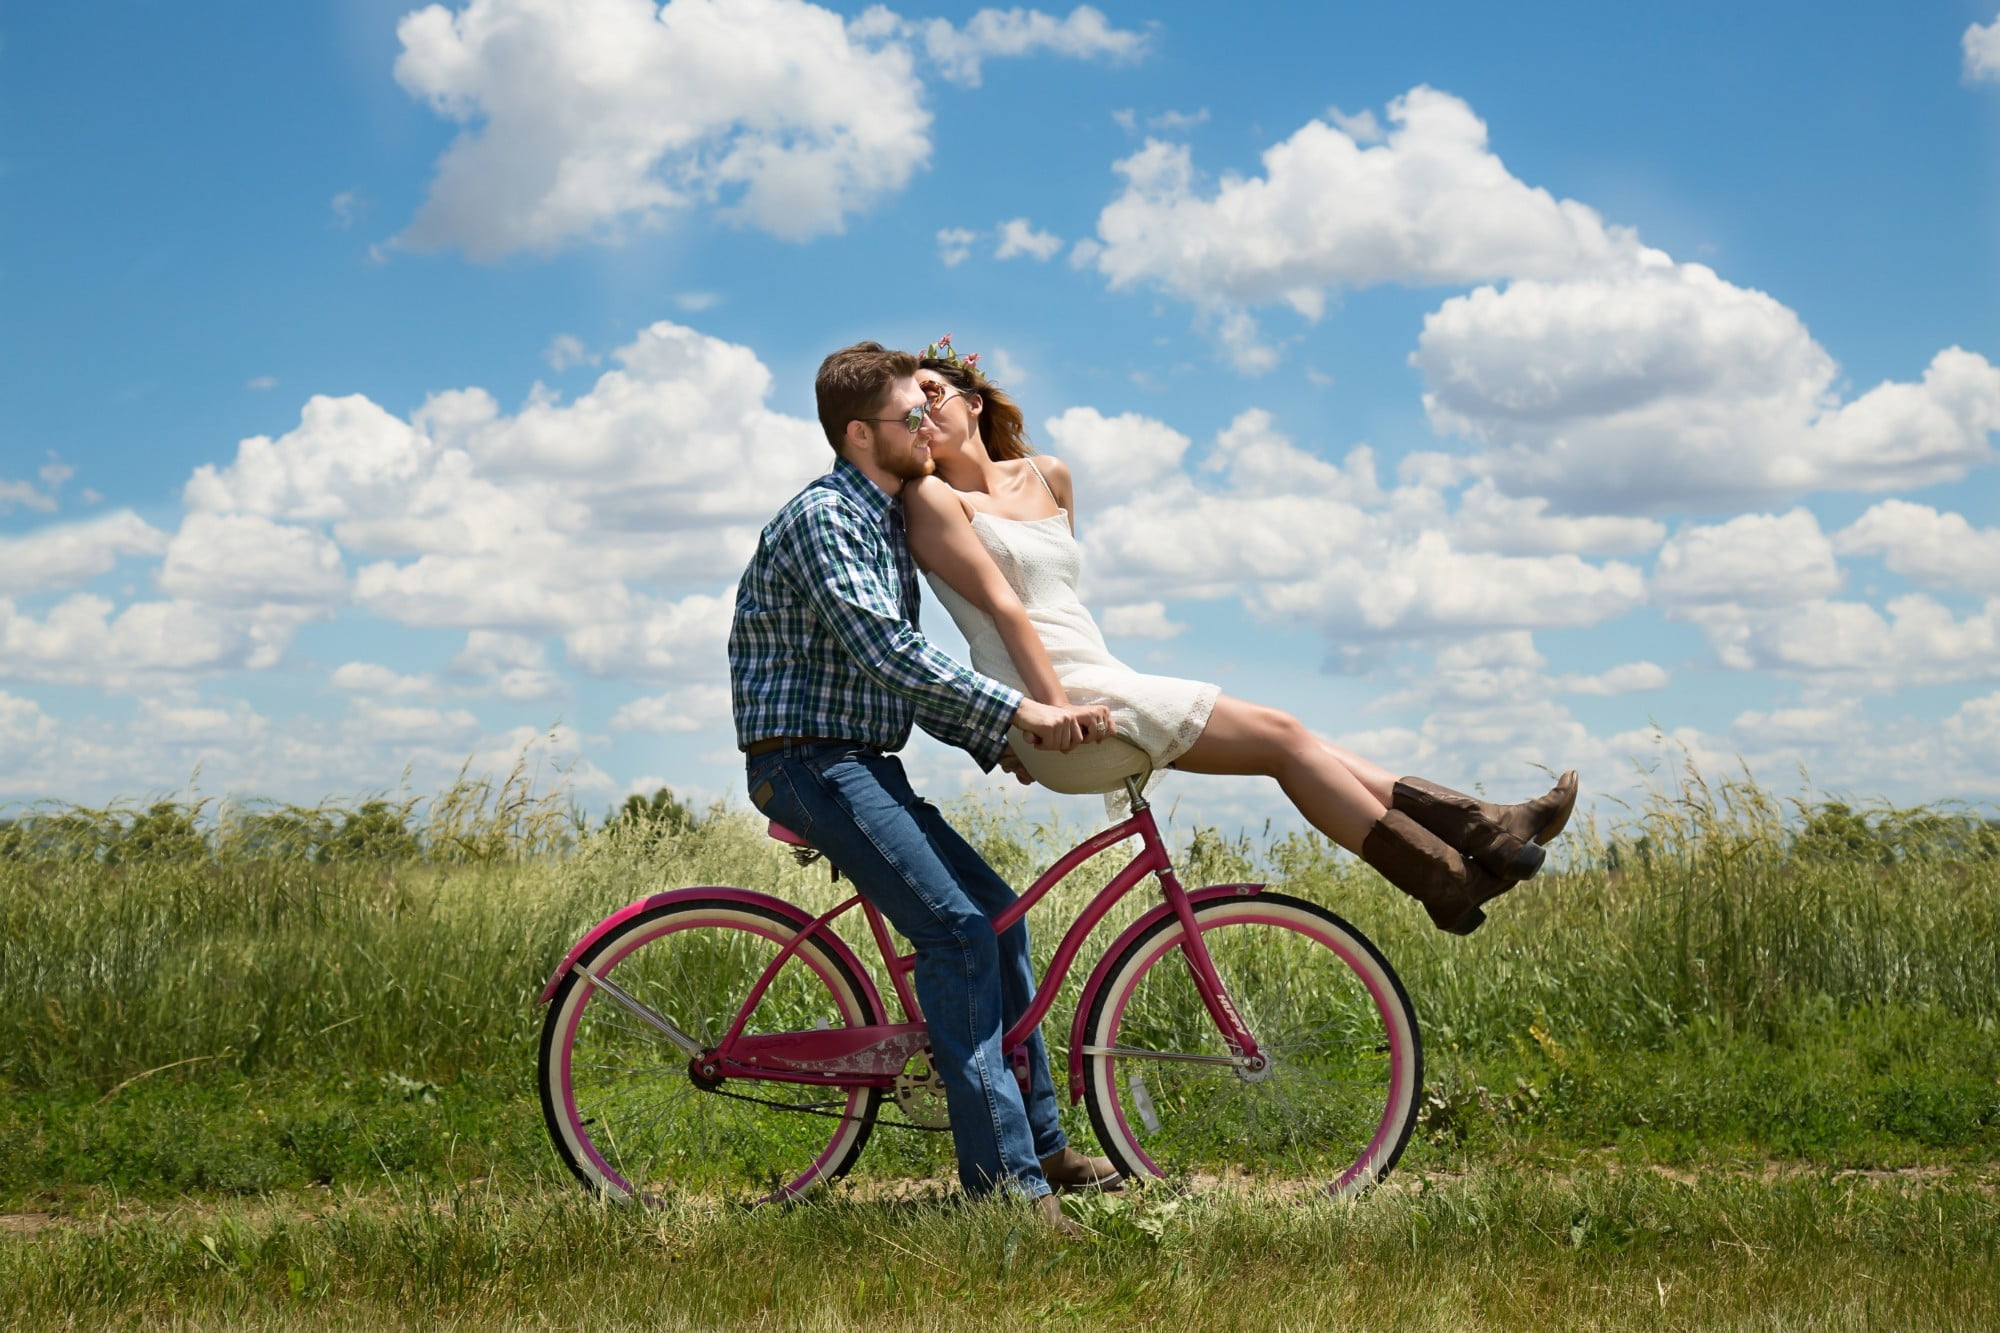 How To Have A Happy Marriage: 7 Things Happily Married Couples Do